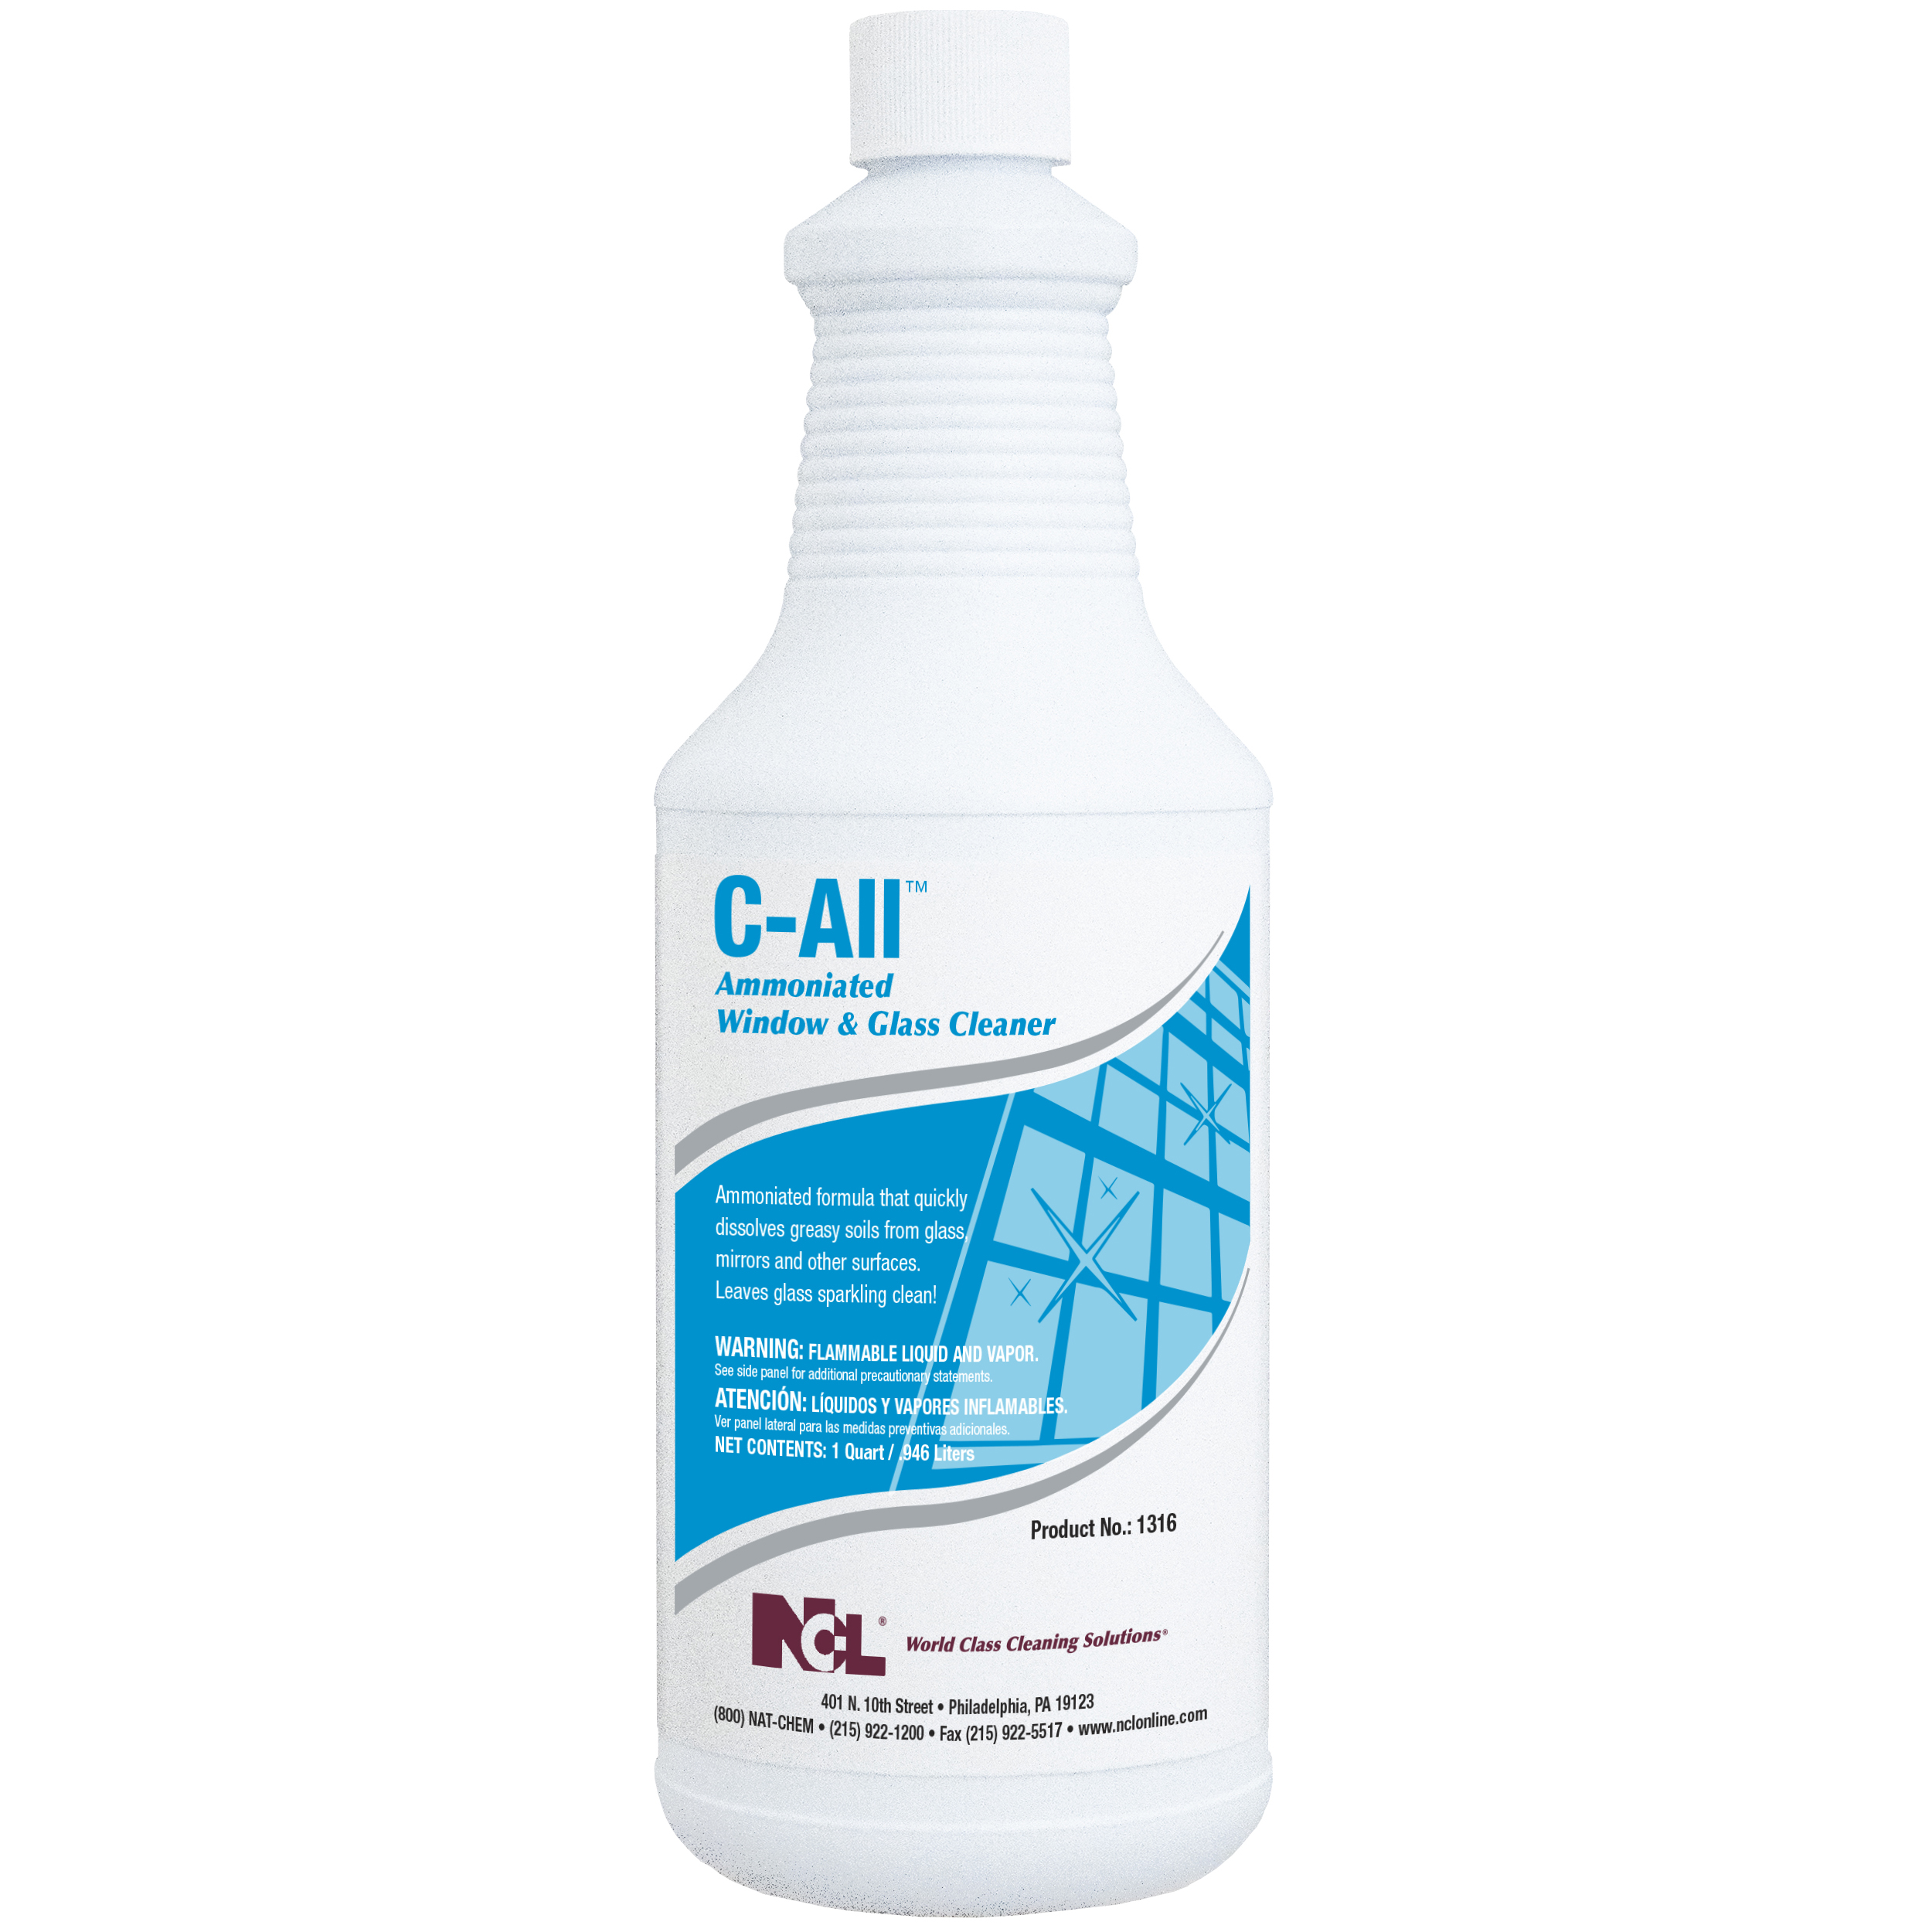  C-ALL Ammoniated Glass & Window Cleaner 12/32 oz (1 Qt.) Case (NCL1316-36) 